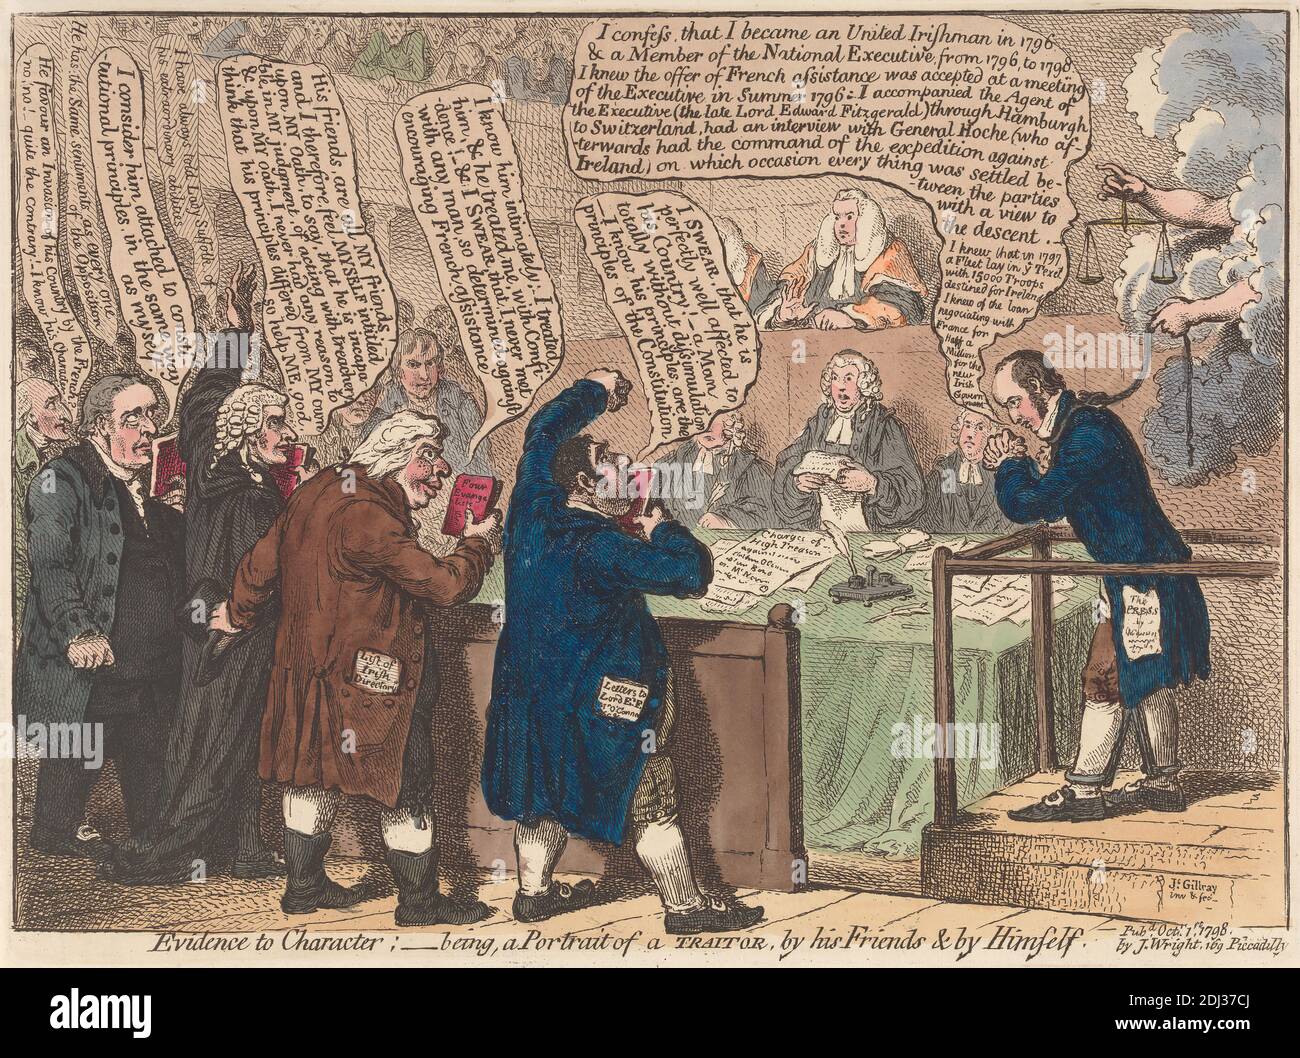 Evidence to Character; - Being, a Portrait of a Traitor by His Friends and by Himself, James Gillray, 1757–1815, British, 1798, Etching, hand-colored, Sheet: 7 1/4 x 10in. (18.4 x 25.4cm Stock Photo